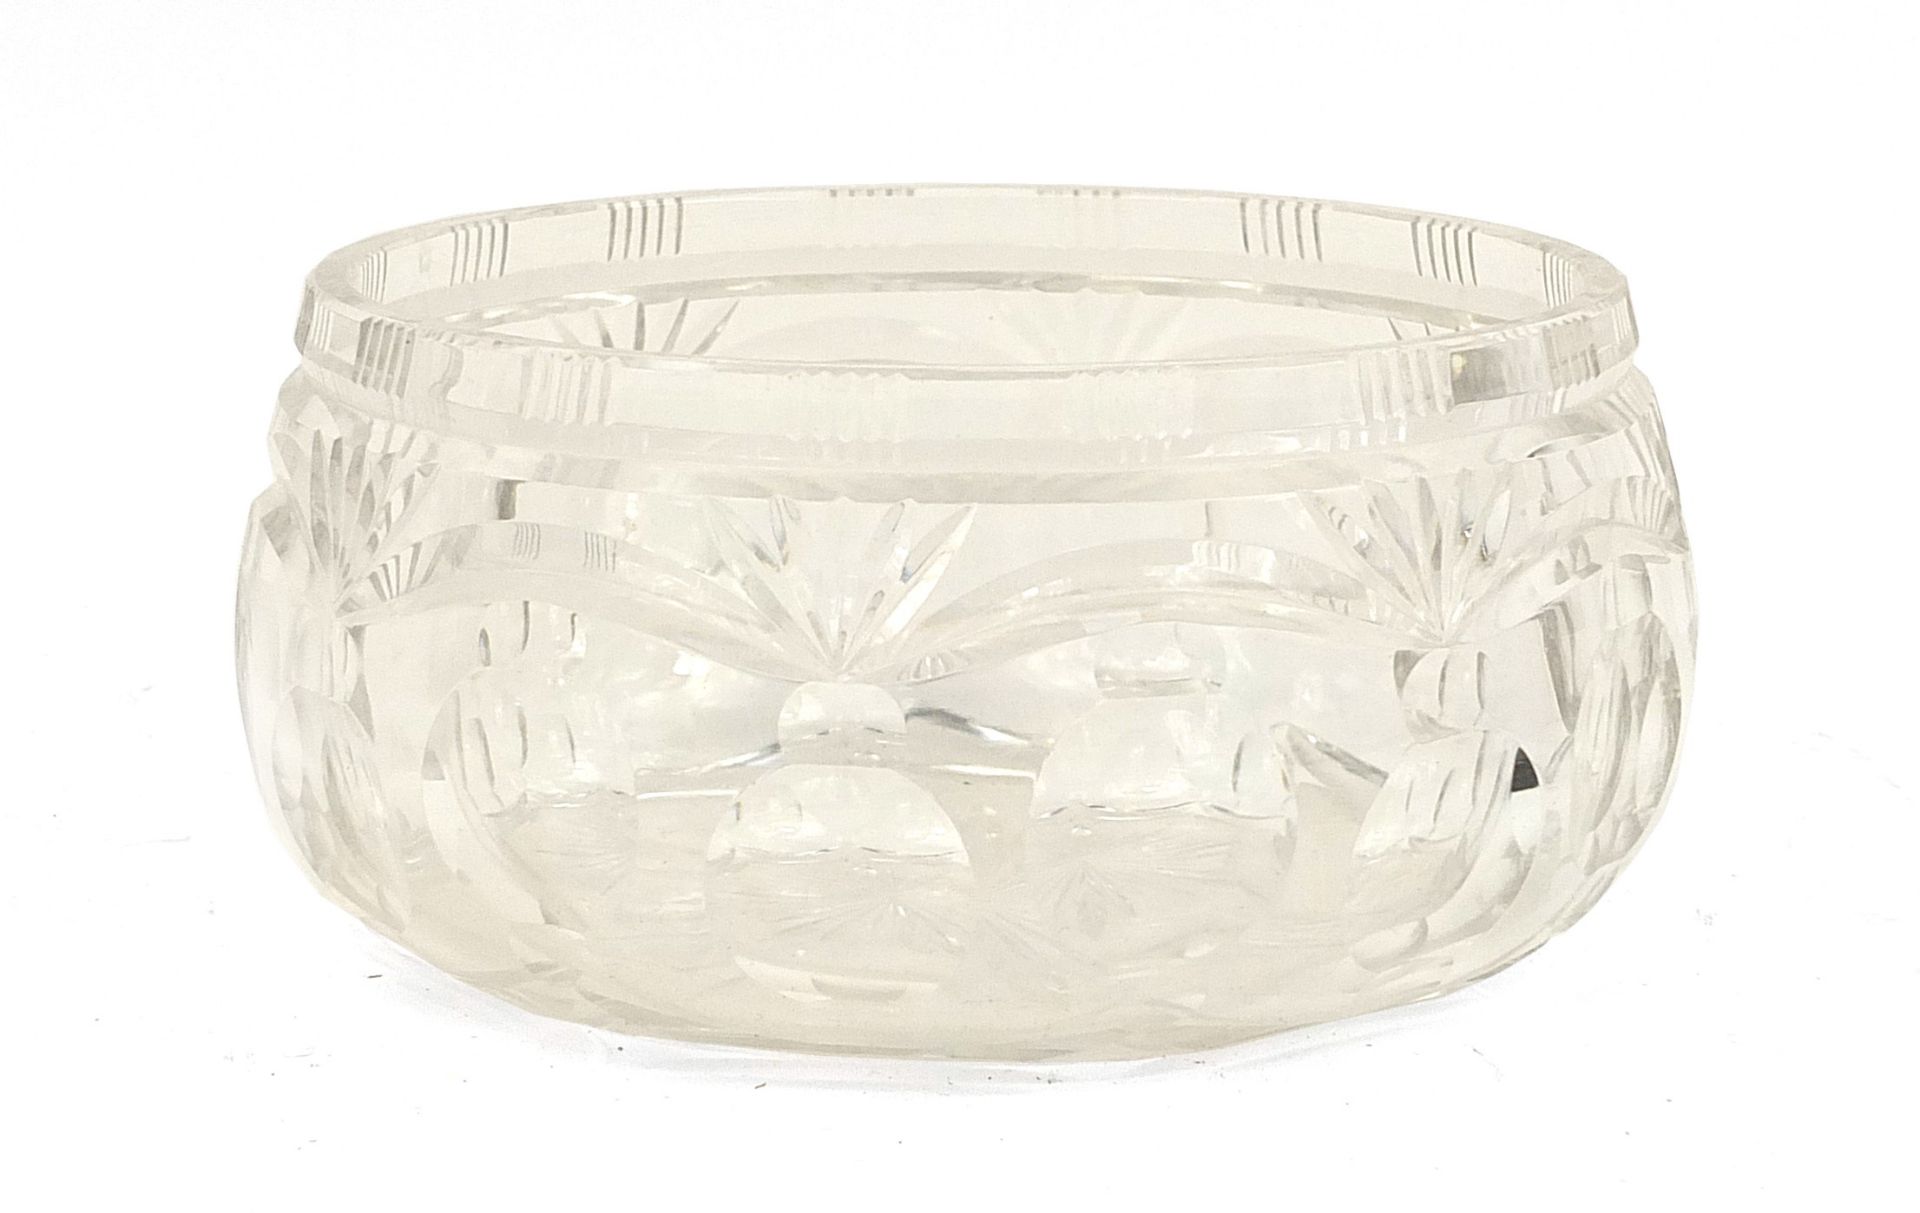 Walsh cut glass fruit bowl with star based decoration and thumbnail sides, 20cm in diameter